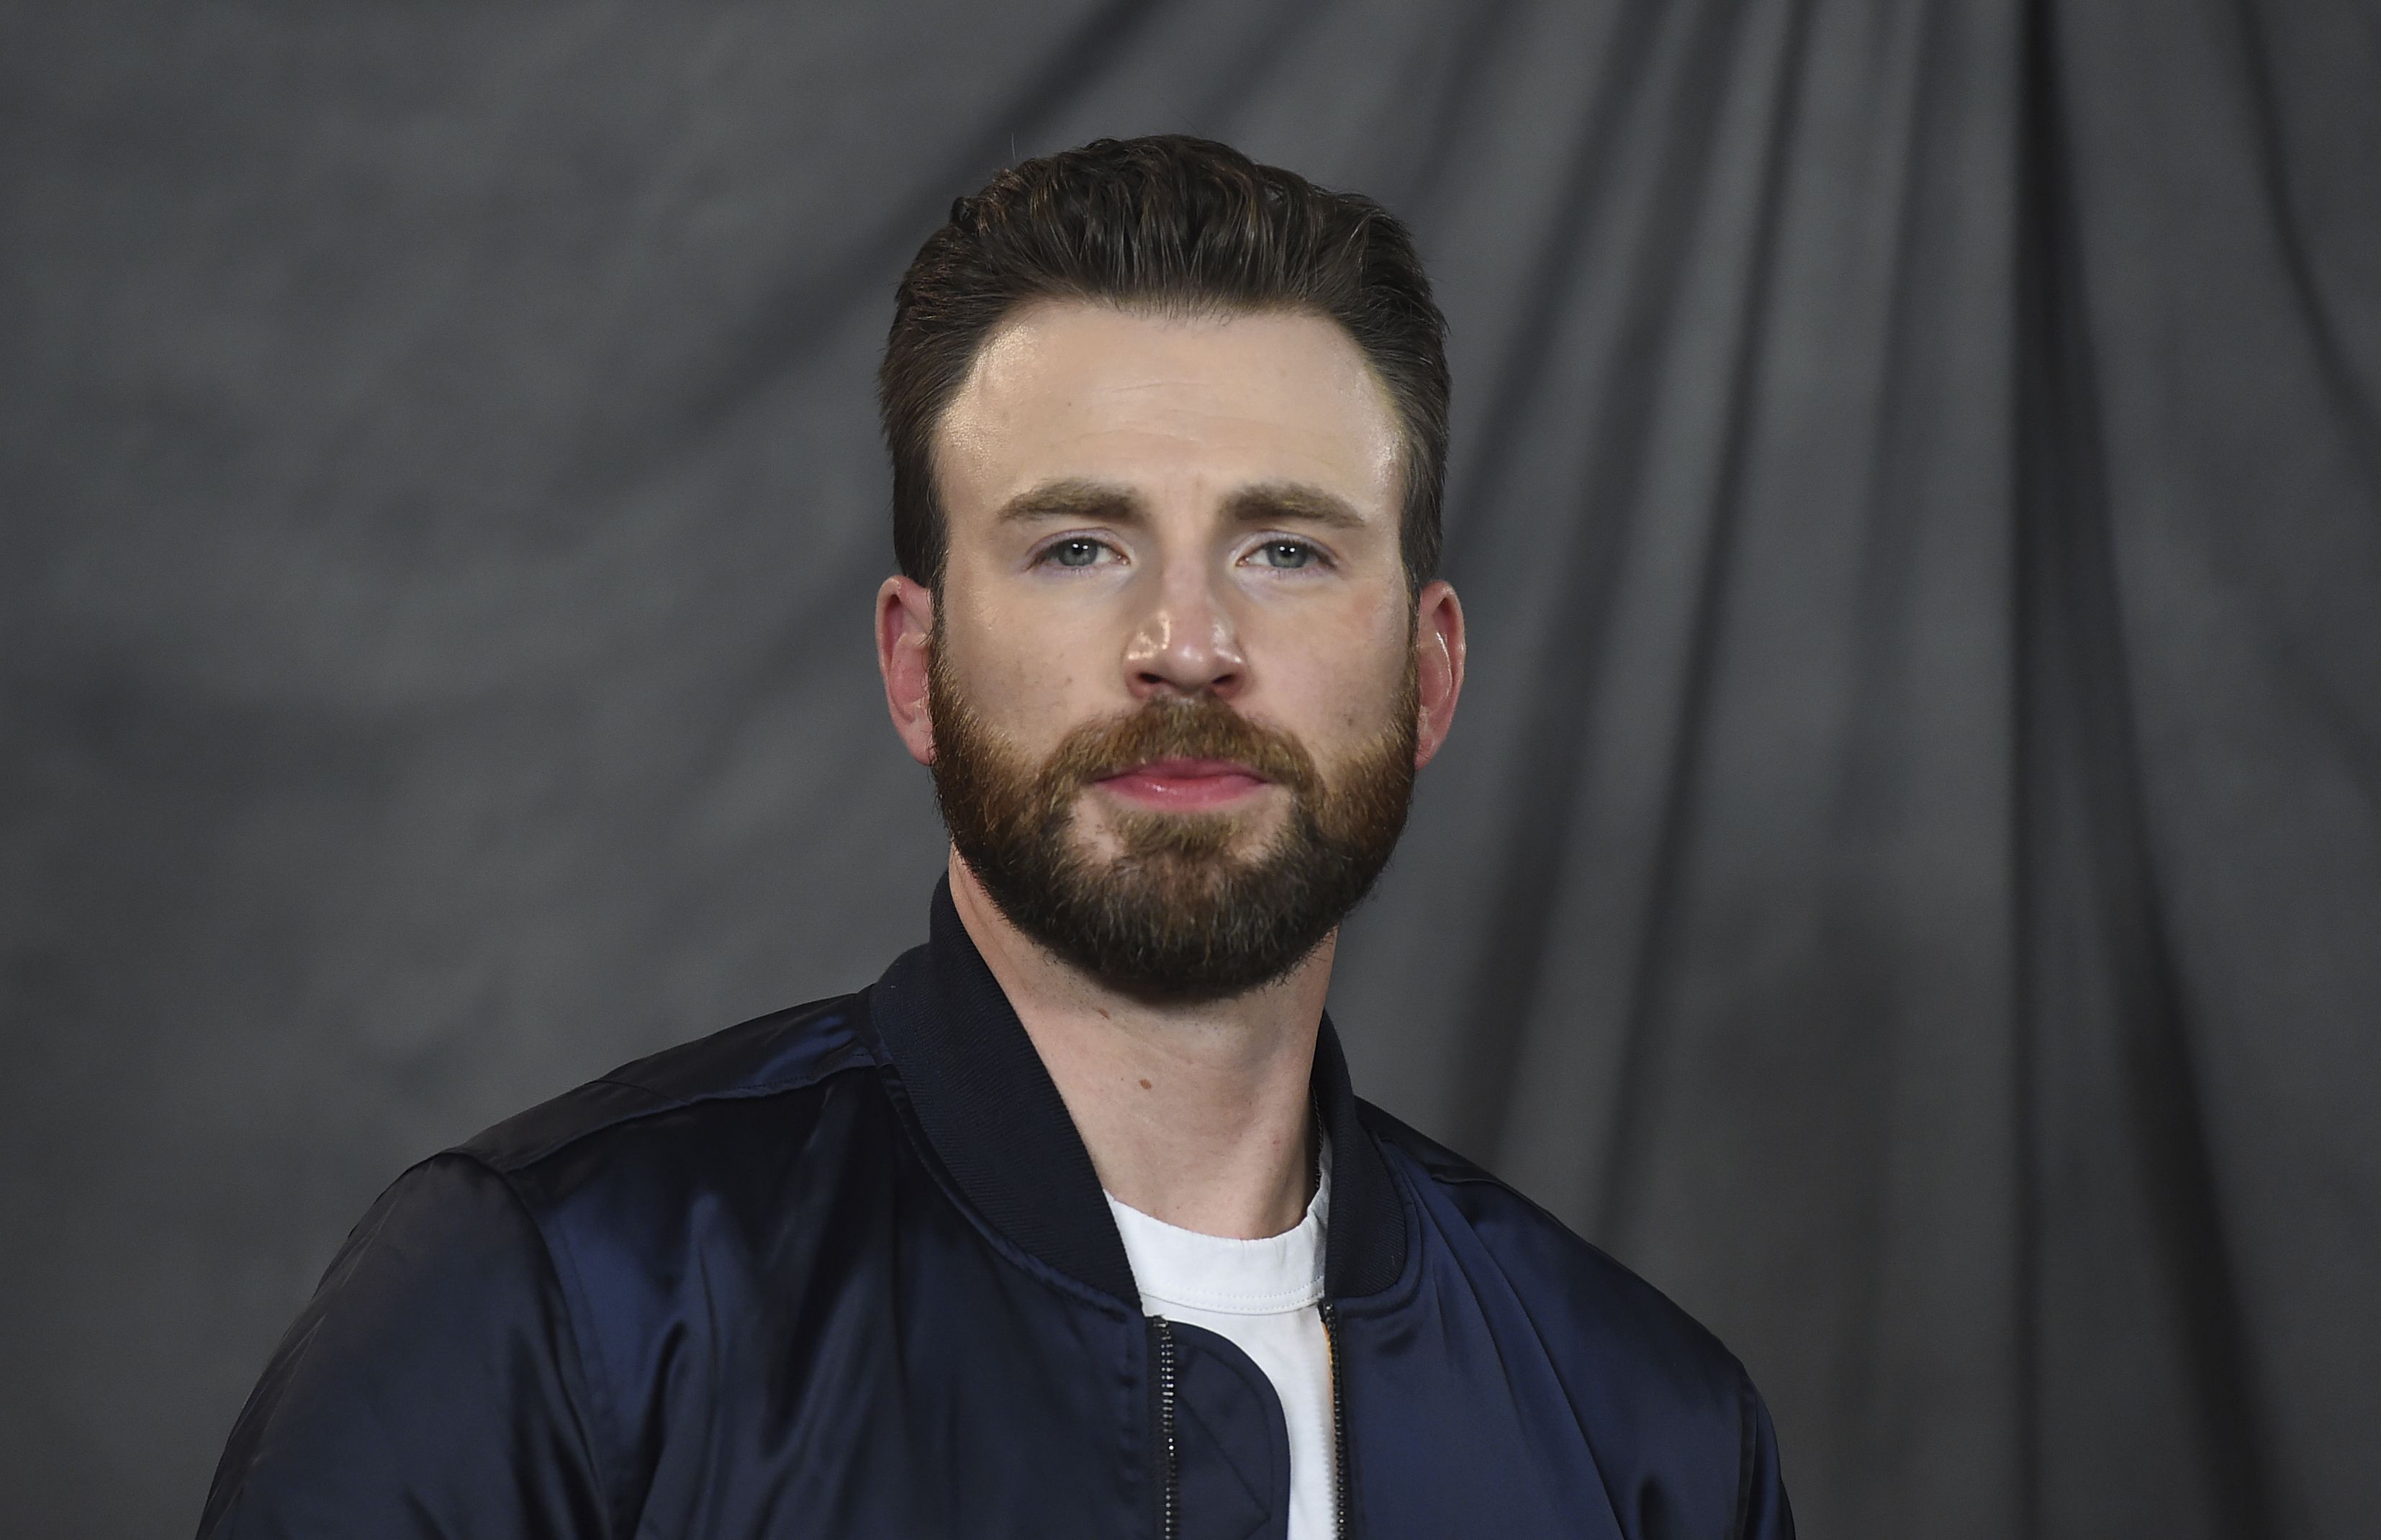 Chris Evans named Sexiest Man Alive by People magazine